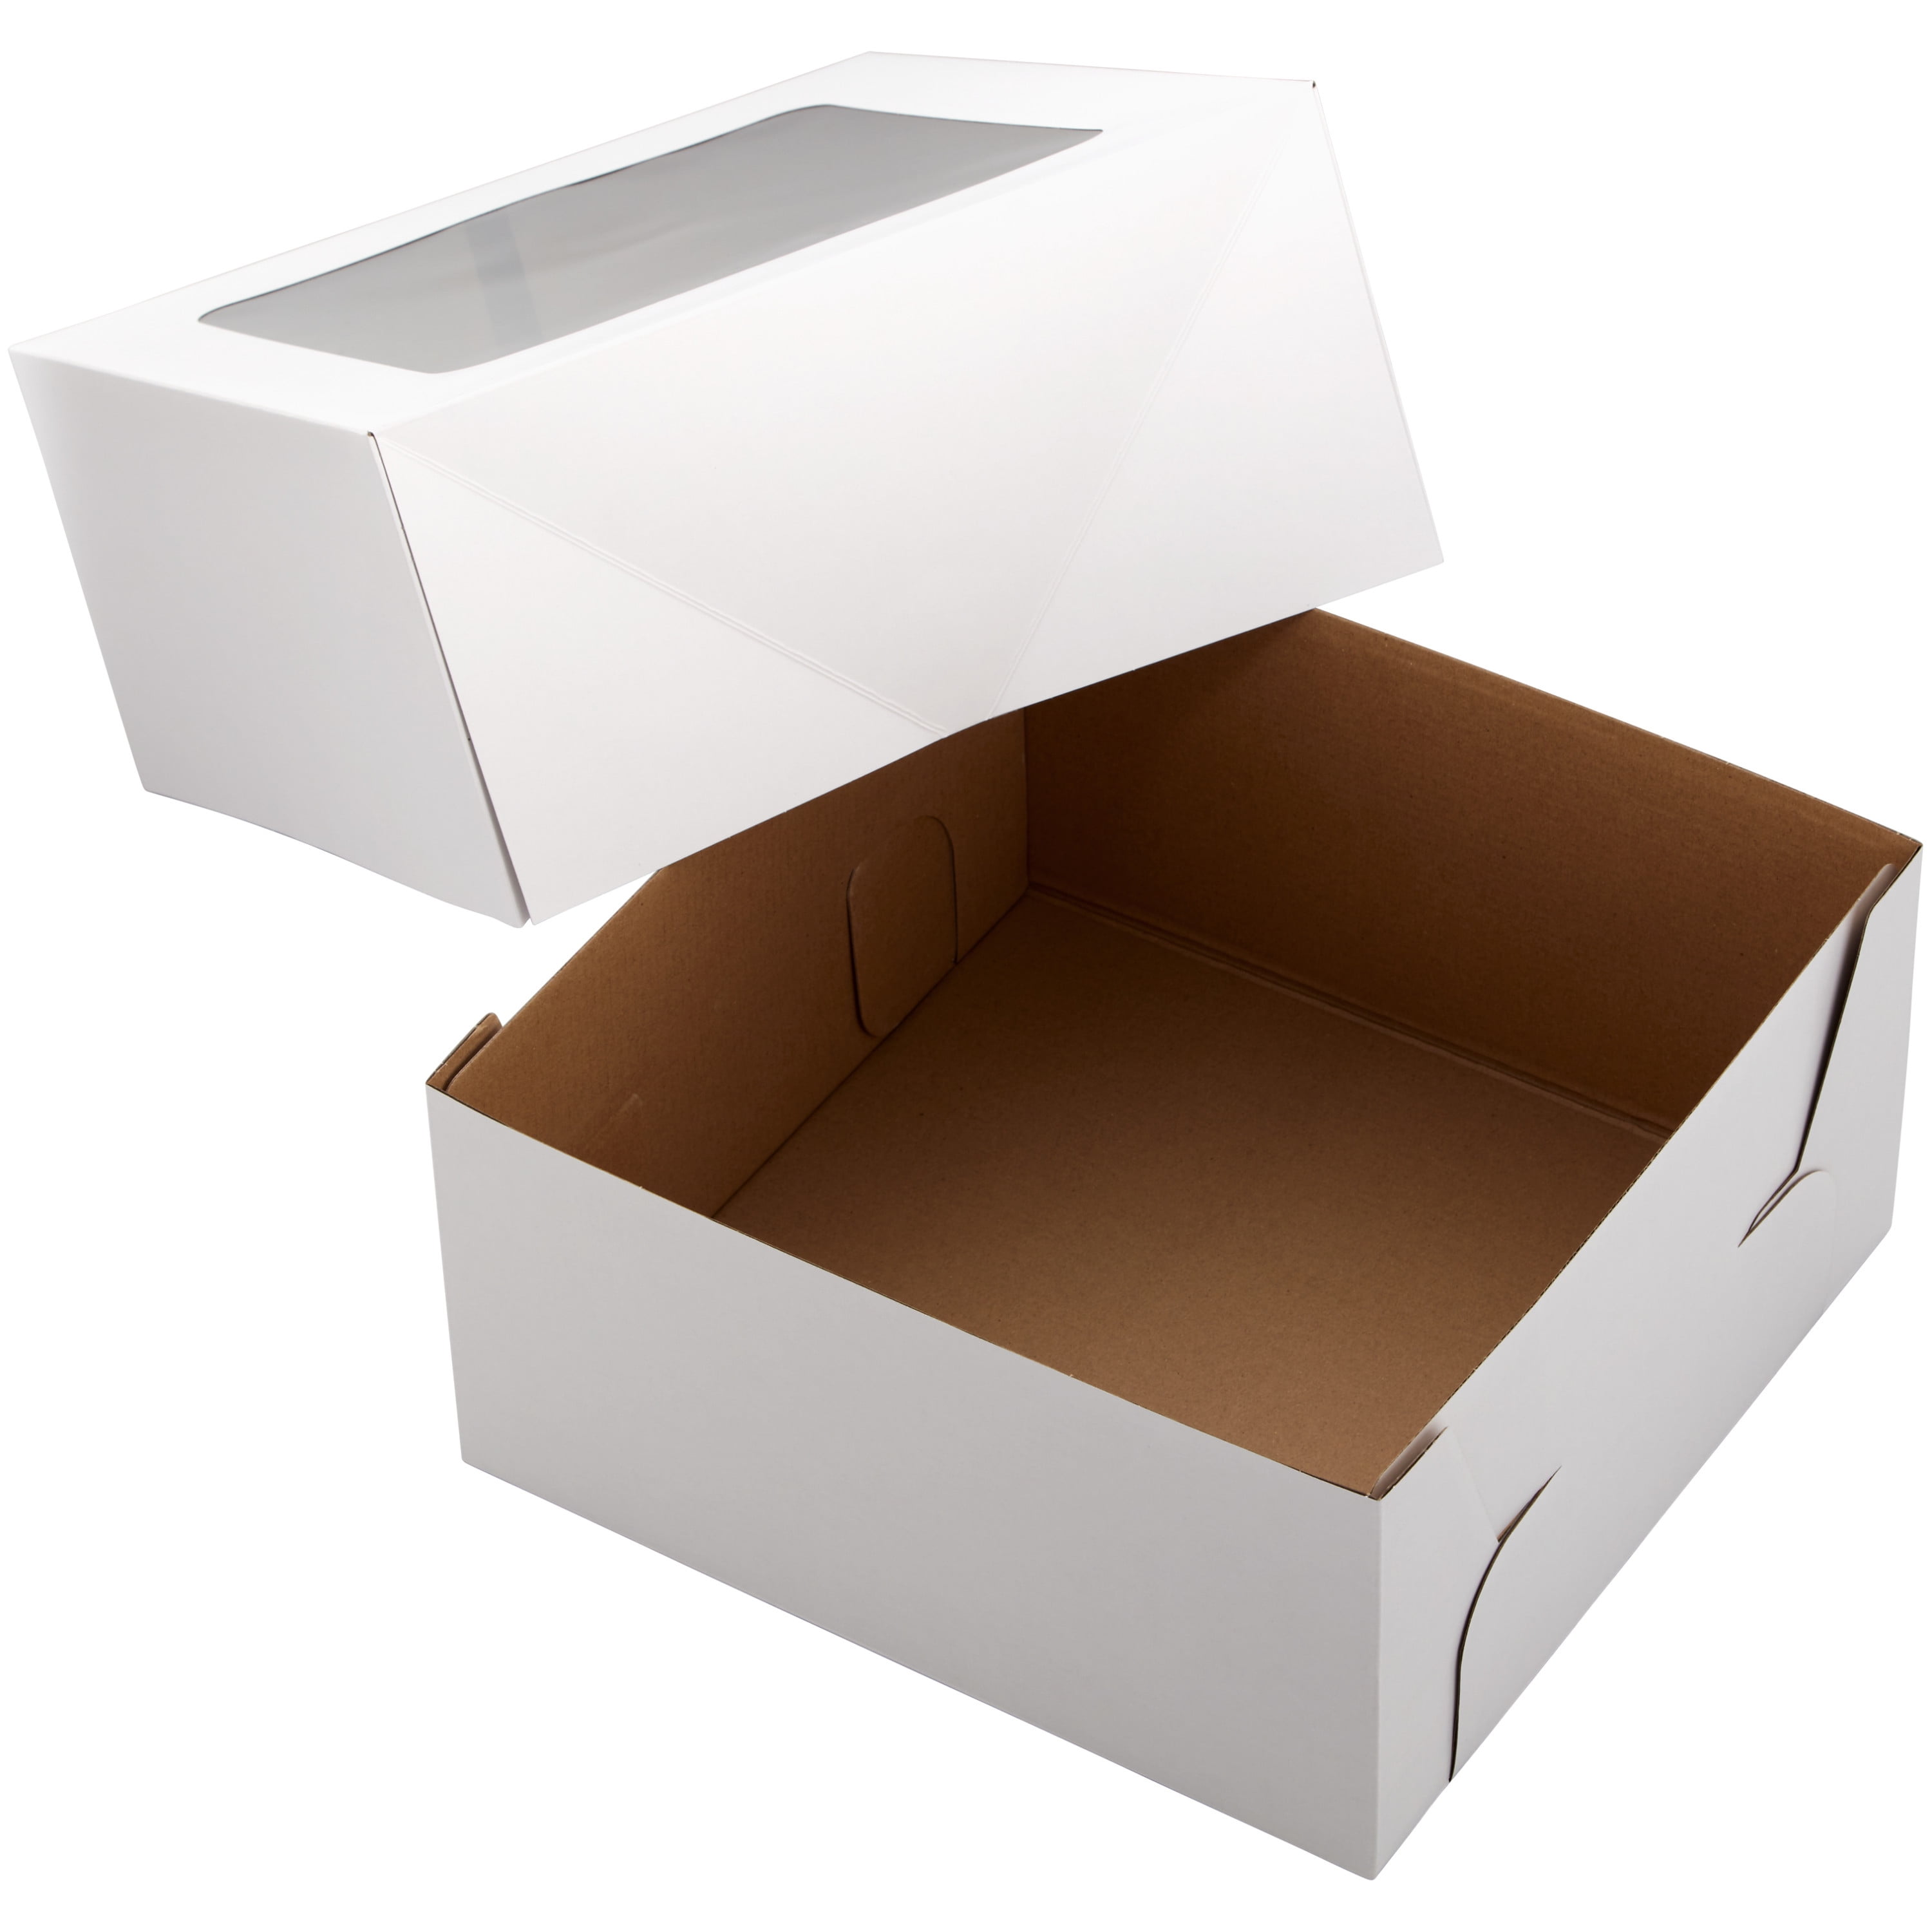 10 Pack Mini Pastry Bakery Box 4.4 X 4.4 Favors Donuts Cookies Torte With Window 